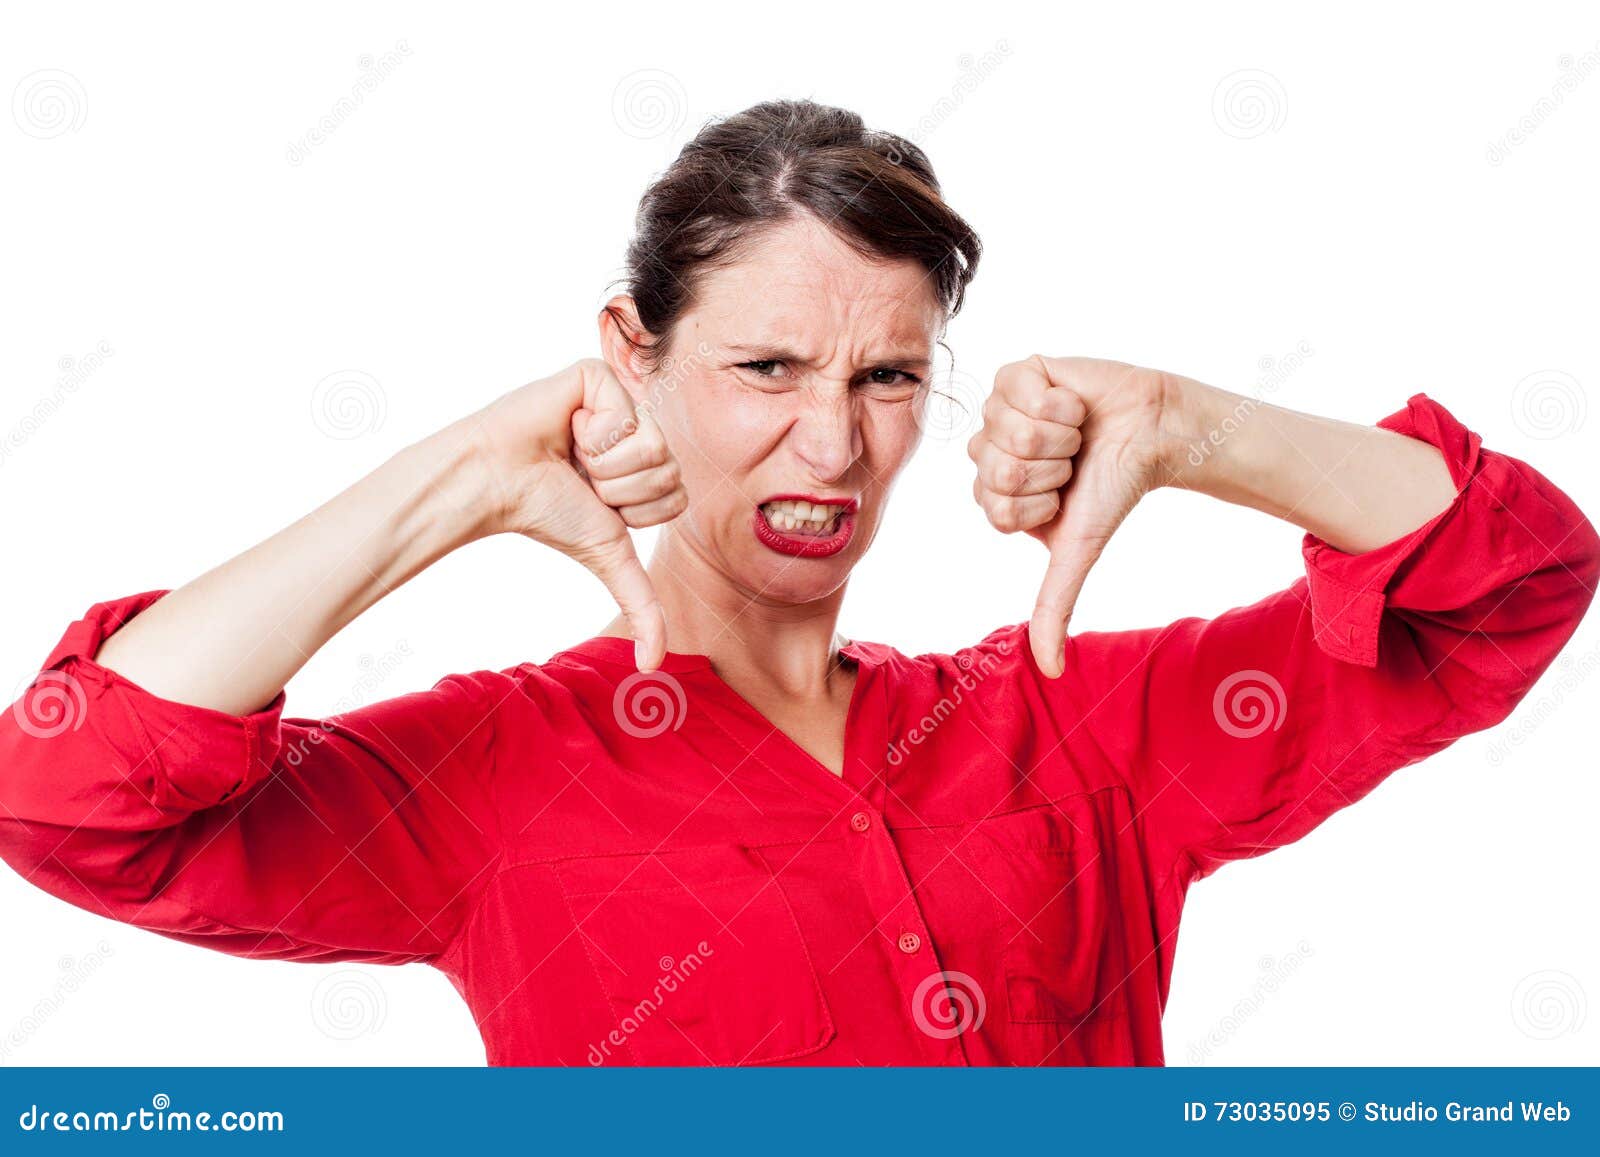 furious young woman with disappointed thumbs down grinding teeth